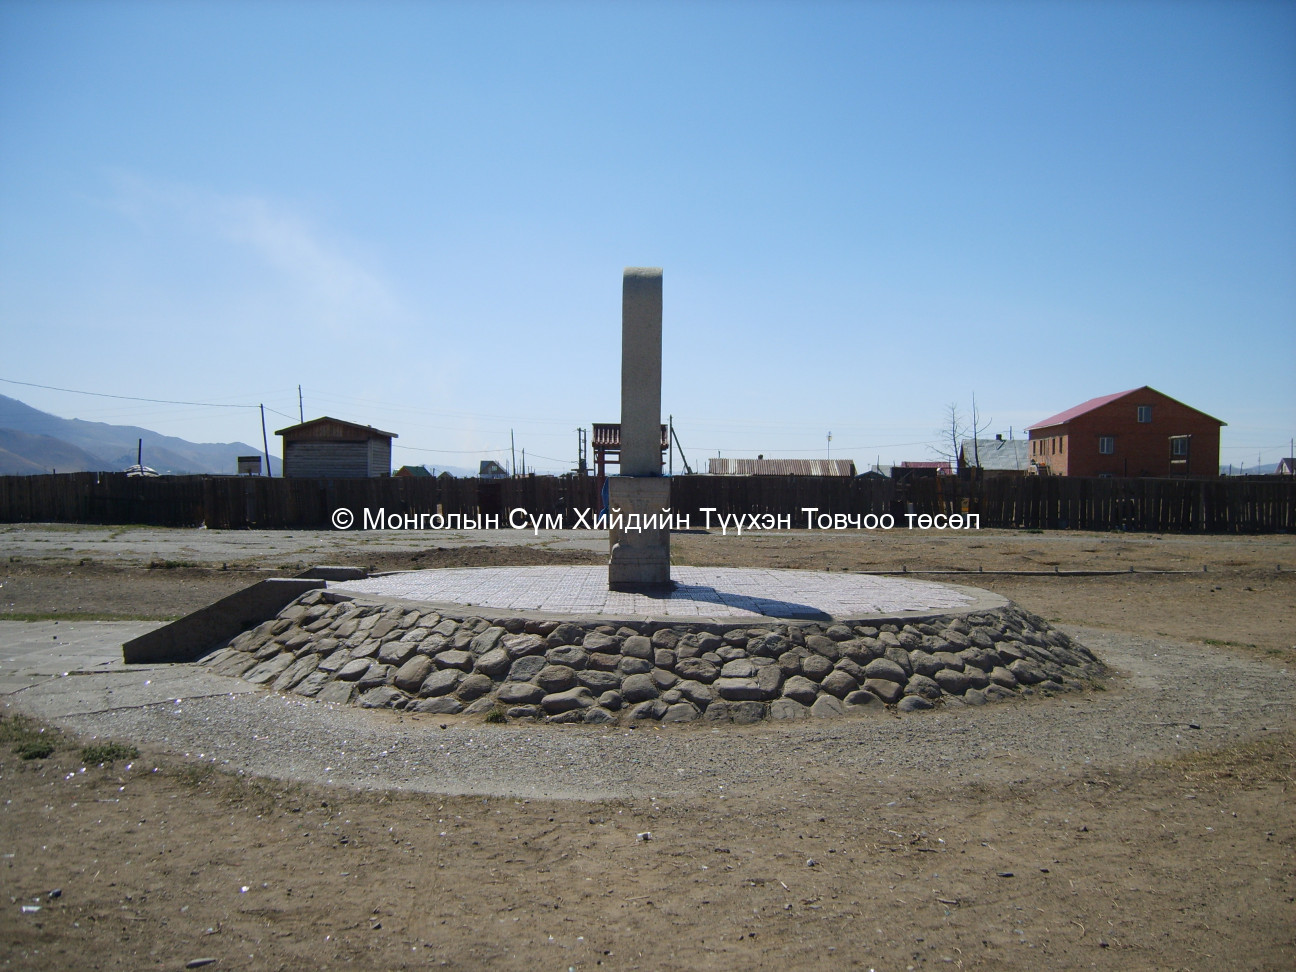 Memorial Place of D. Sükhbaatar in the East of Tar